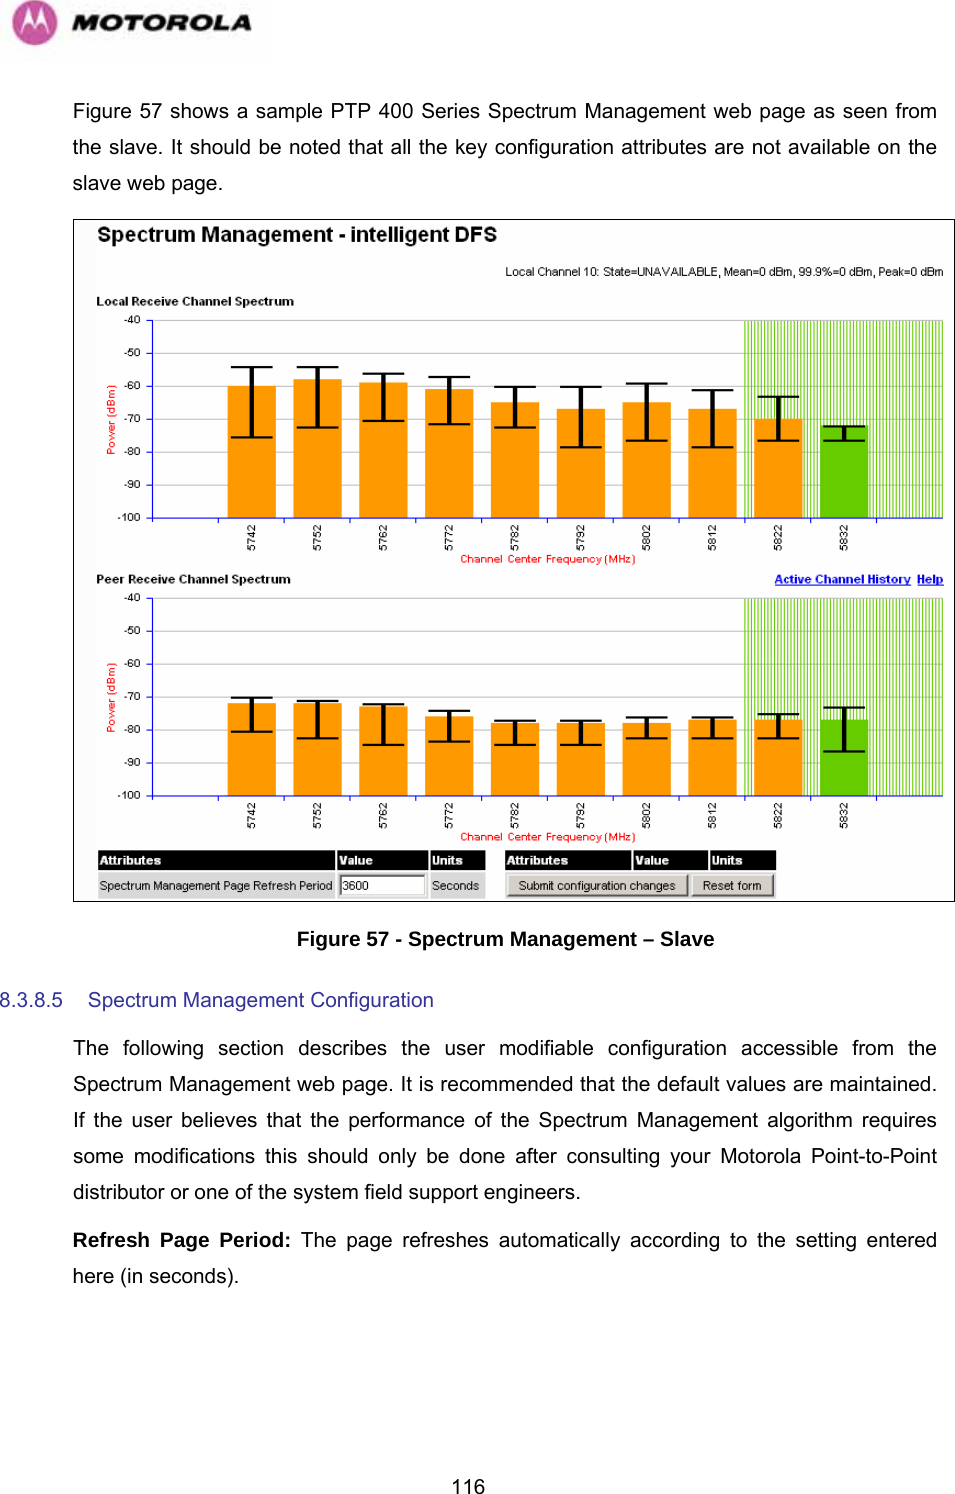   116Figure 57 shows a sample PTP 400 Series Spectrum Management web page as seen from the slave. It should be noted that all the key configuration attributes are not available on the slave web page.  Figure 57 - Spectrum Management – Slave 8.3.8.5  Spectrum Management Configuration  The following section describes the user modifiable configuration accessible from the Spectrum Management web page. It is recommended that the default values are maintained. If the user believes that the performance of the Spectrum Management algorithm requires some modifications this should only be done after consulting your Motorola Point-to-Point distributor or one of the system field support engineers. Refresh Page Period: The page refreshes automatically according to the setting entered here (in seconds).  